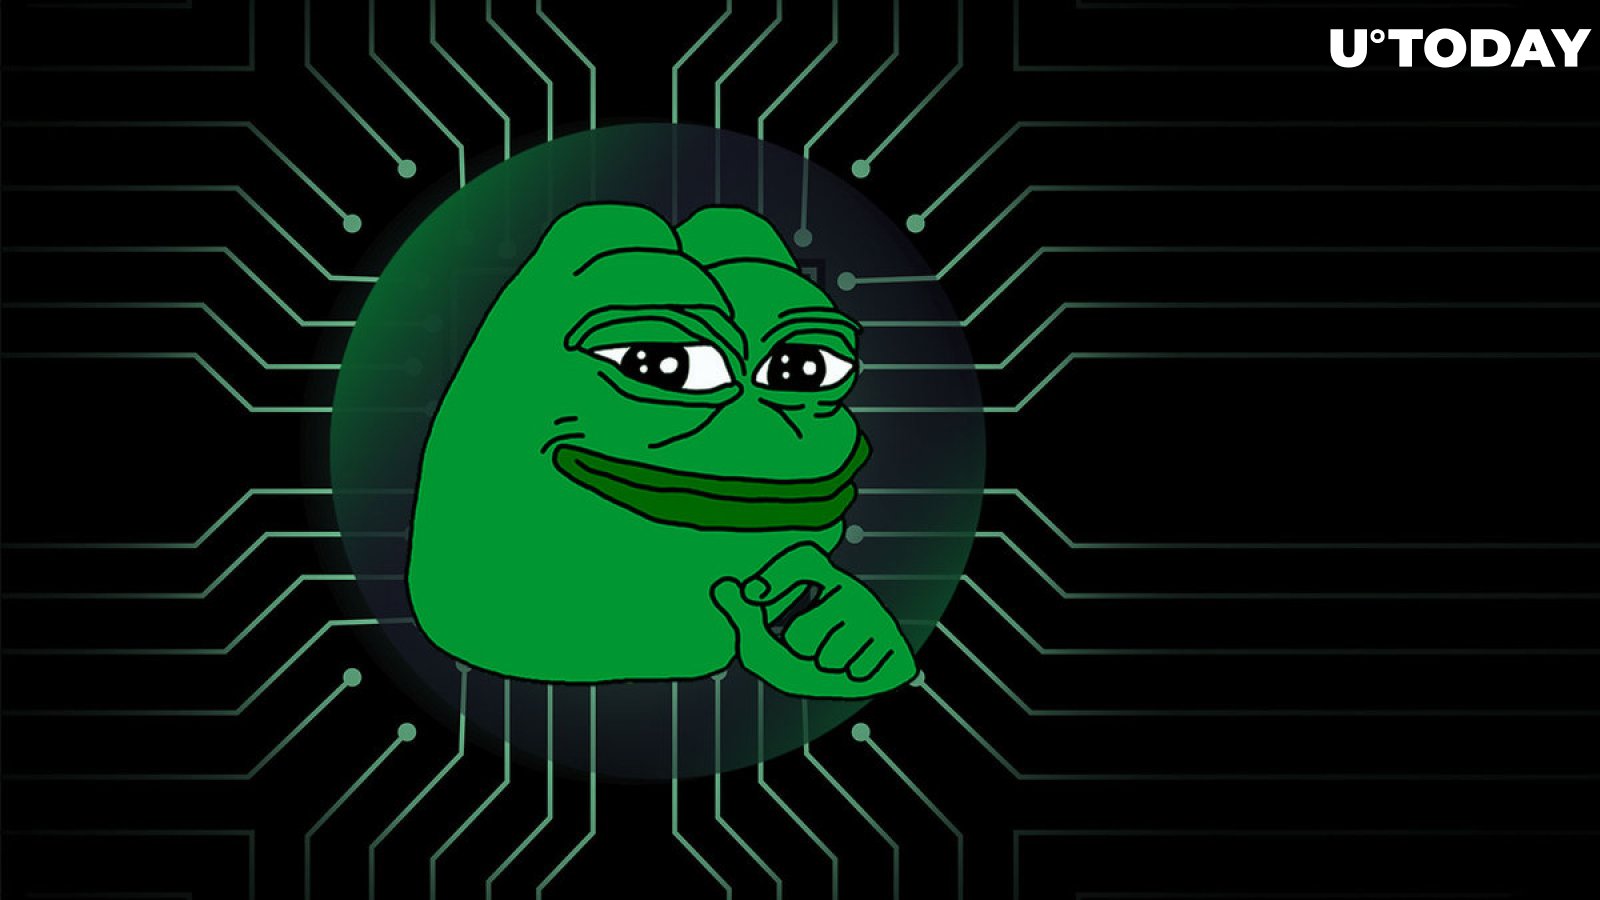 Pepe (PEPE) Single-handedly Destroyed 5,000 ETH, Here's How